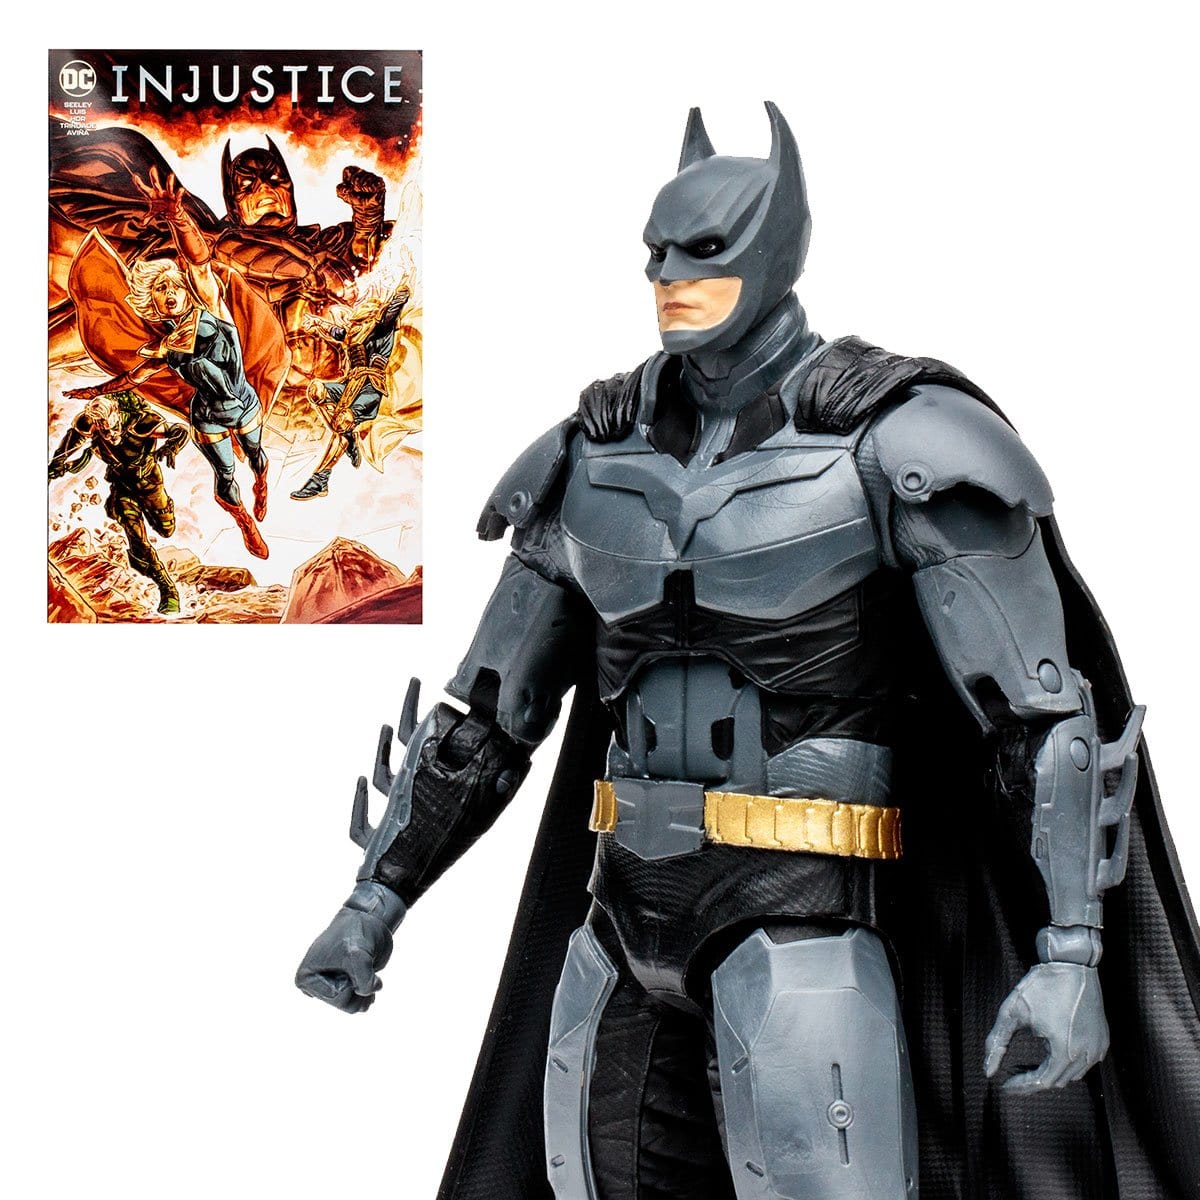 Injustice 2 Batman Page Punchers 7-Inch Scale Action Figure with Injustice Comic Book Side pose